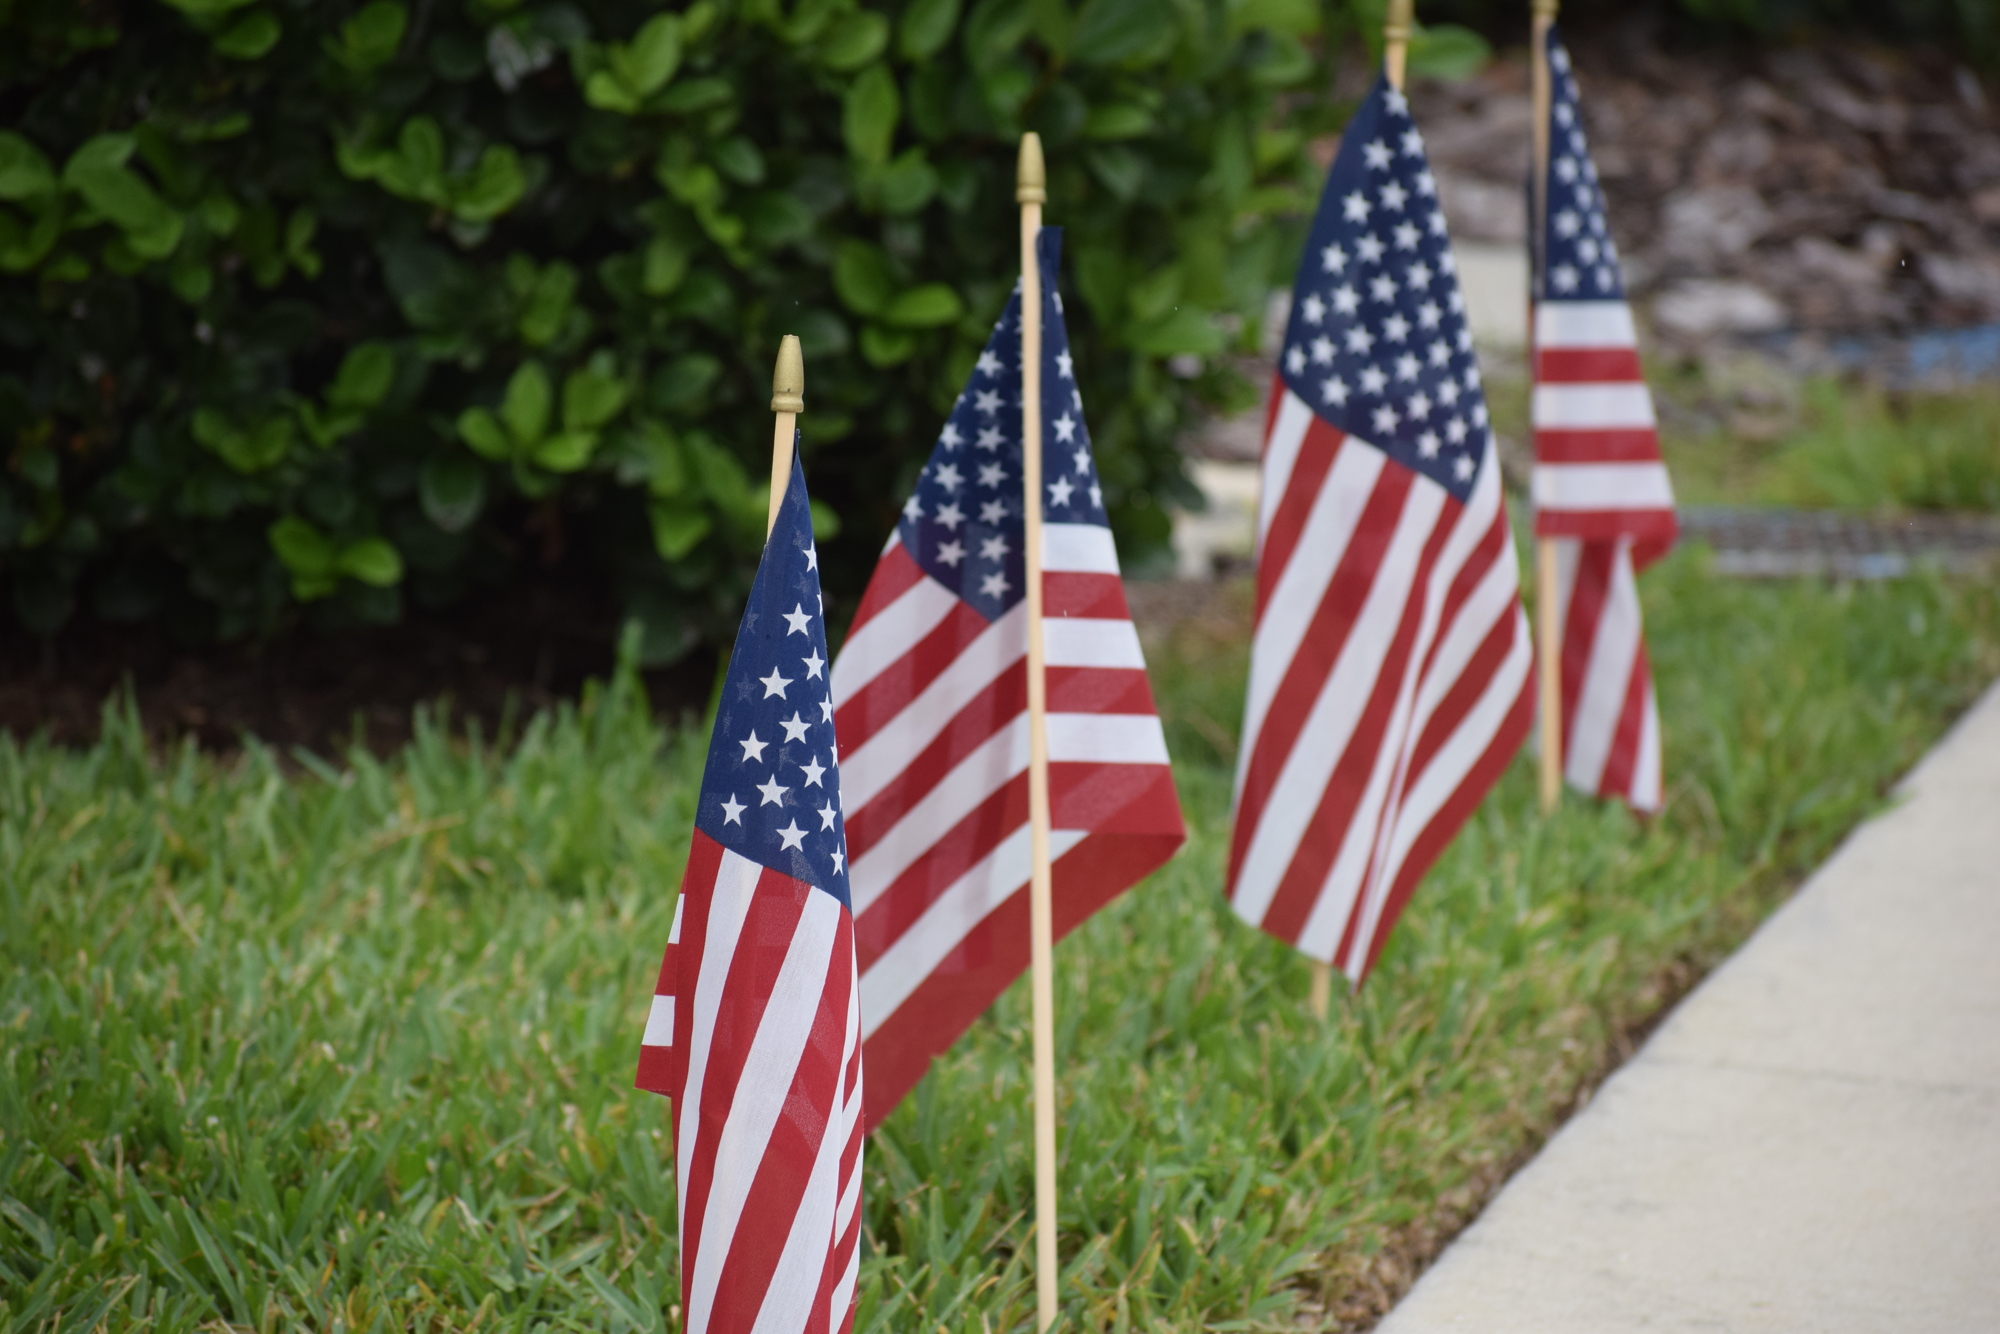 Lakewood Ranch Community Activities hold a virtual event on Memorial Day to honor our fallen heroes.